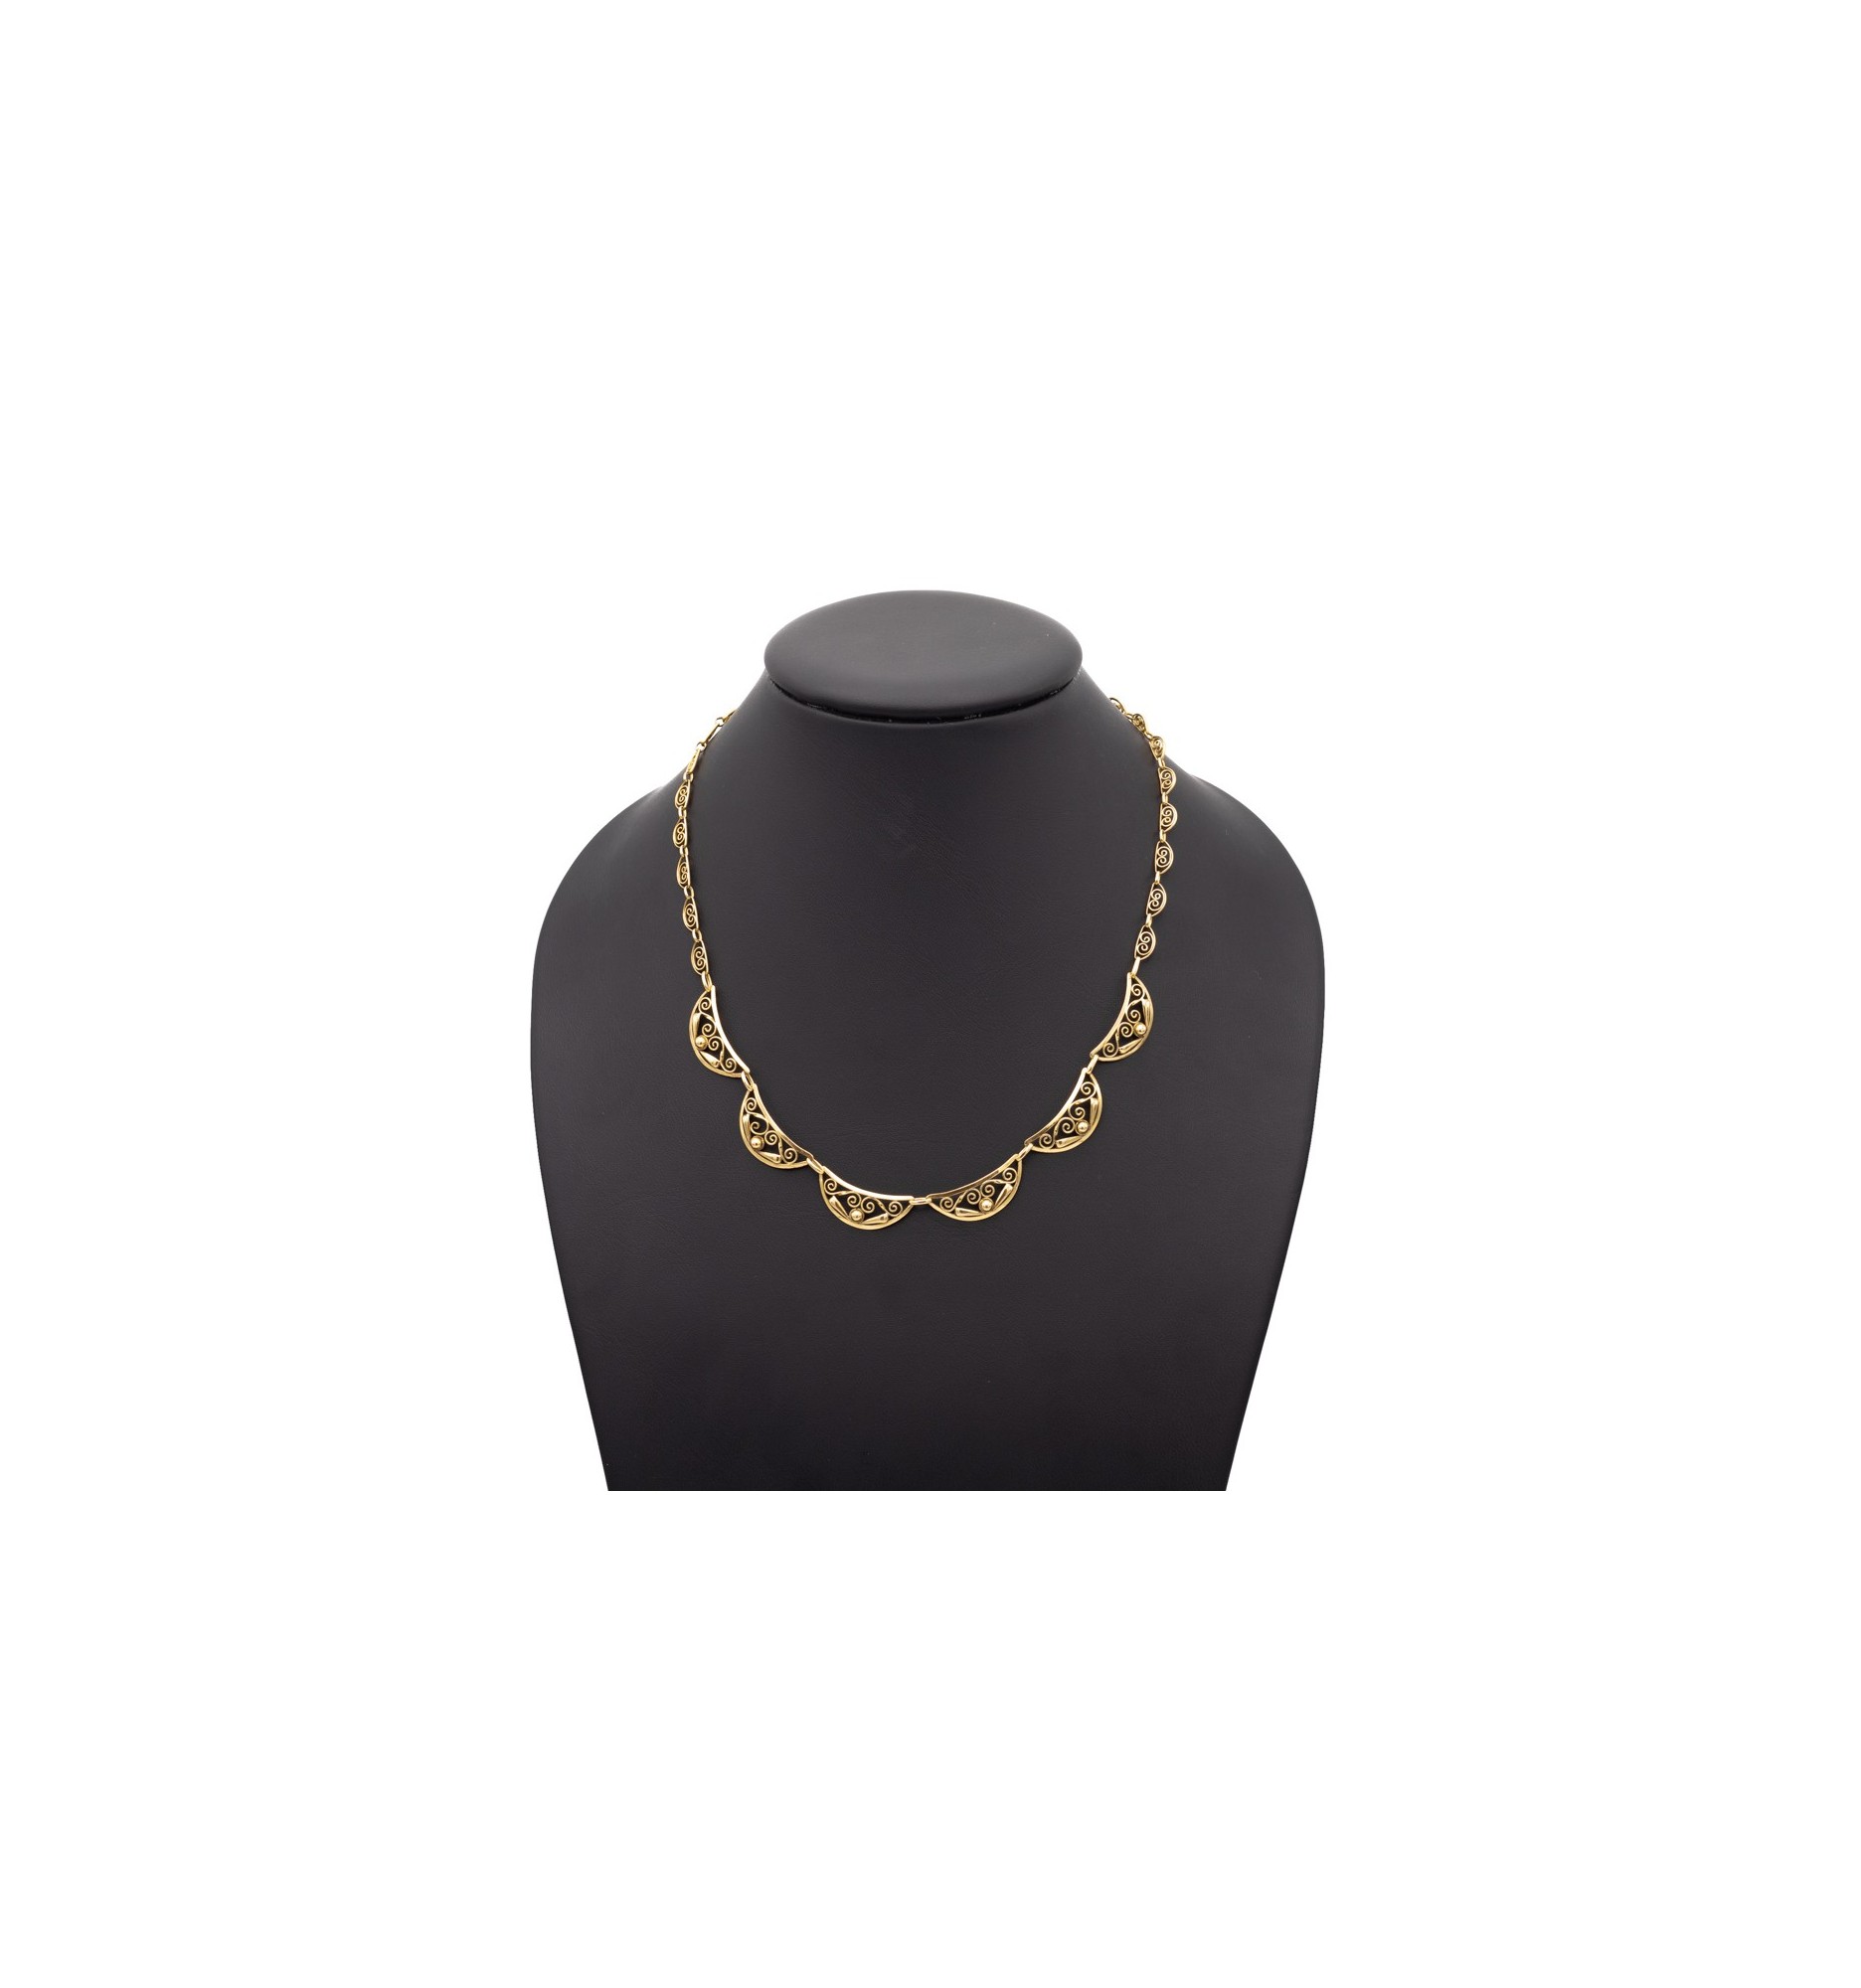 Elsa - trendy french sautoir - yellow gold necklace